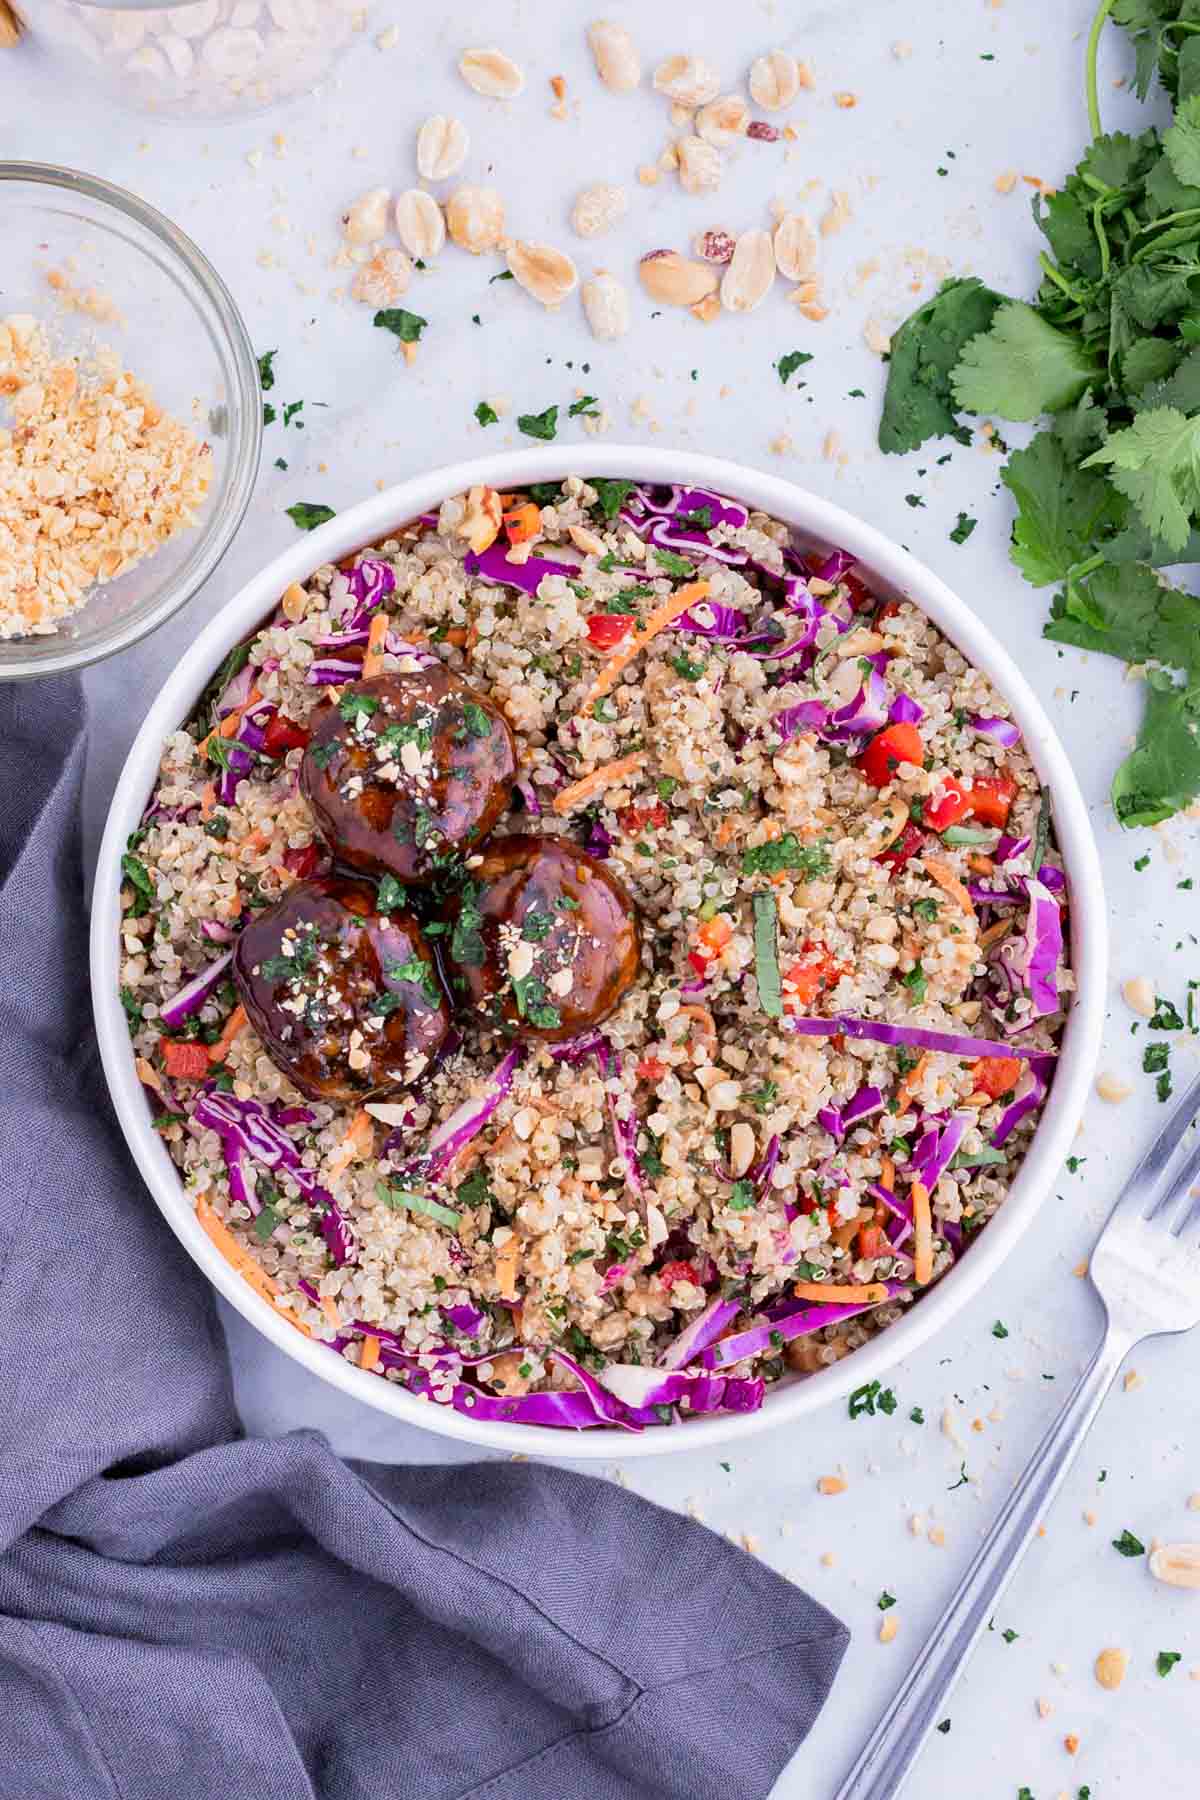 Thai meatballs are served in a white plate with quinoa salad.